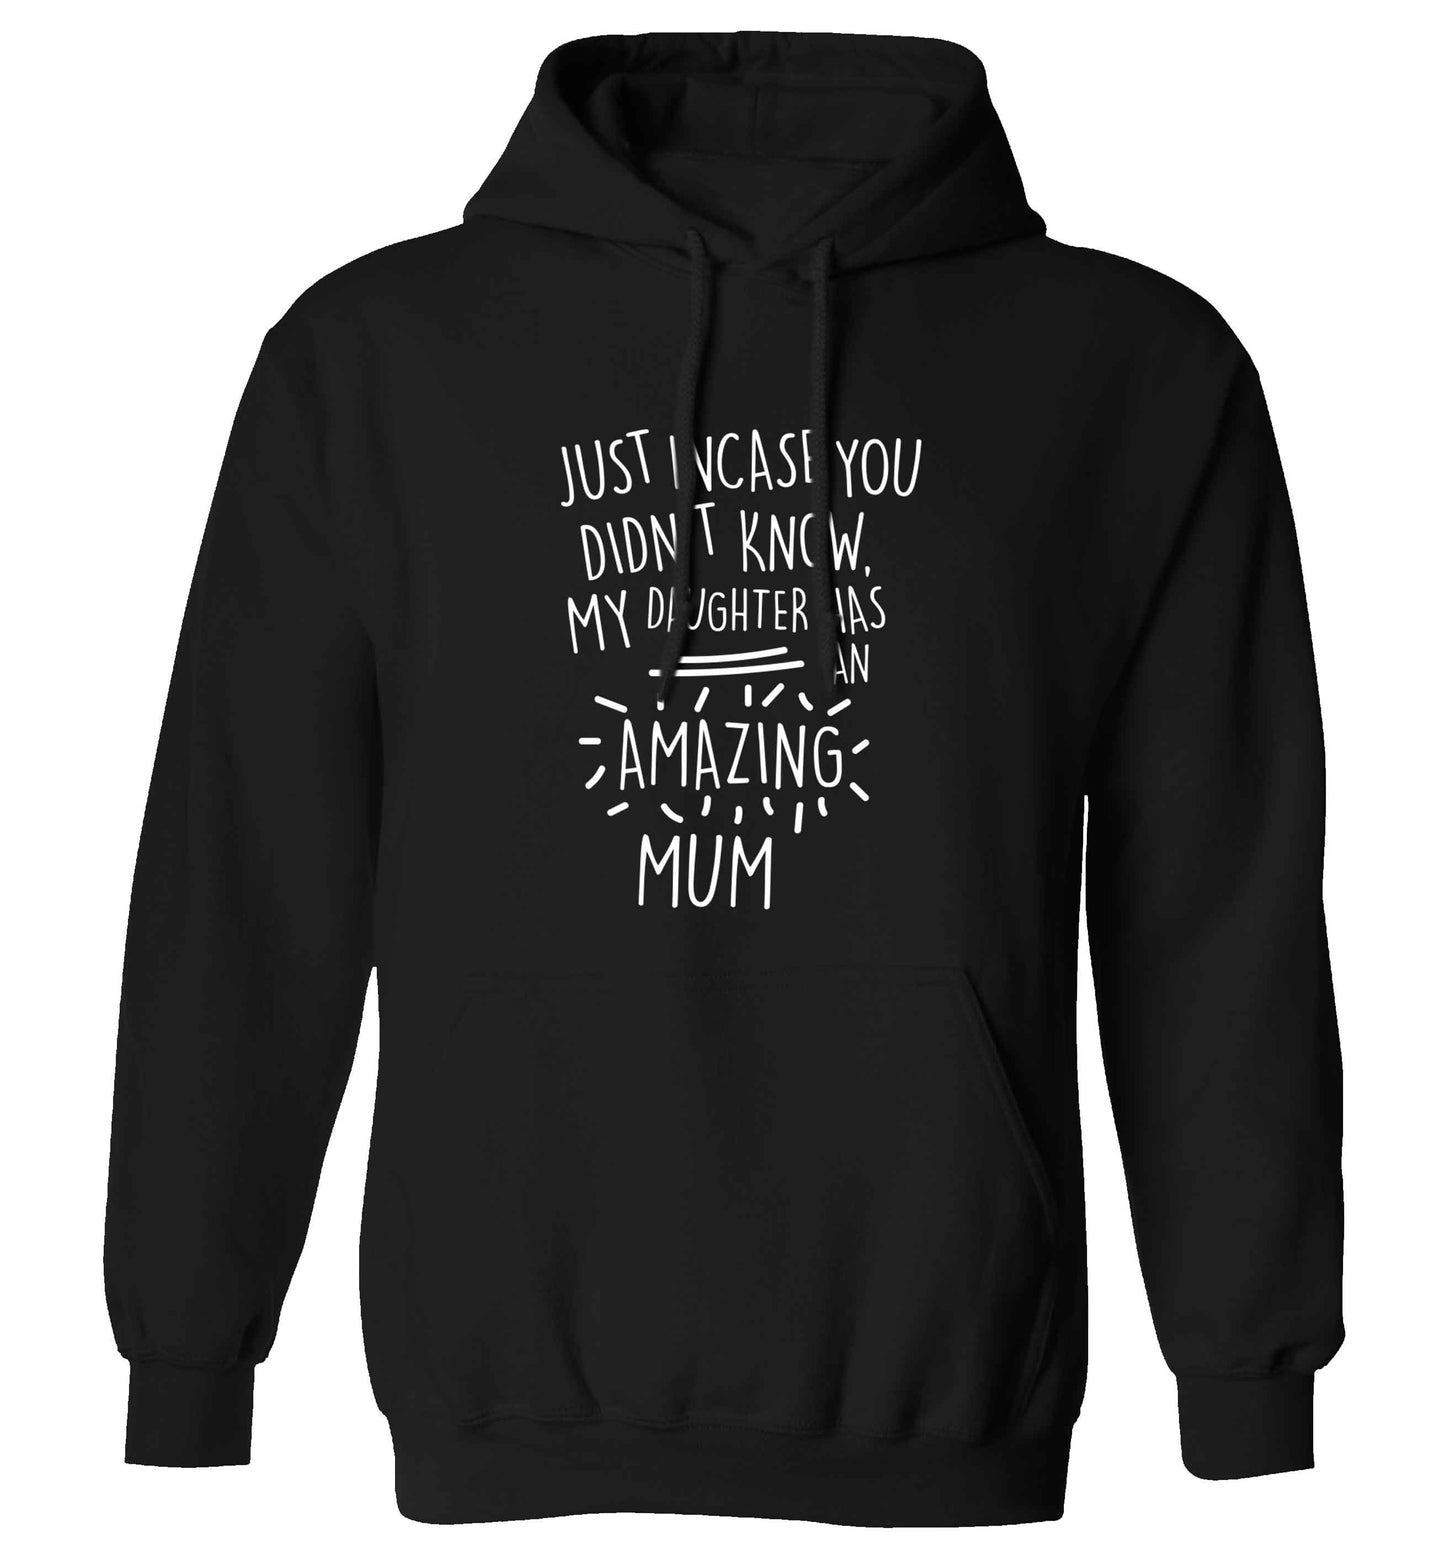 Just incase you didn't know my daughter has an amazing mum adults unisex black hoodie 2XL